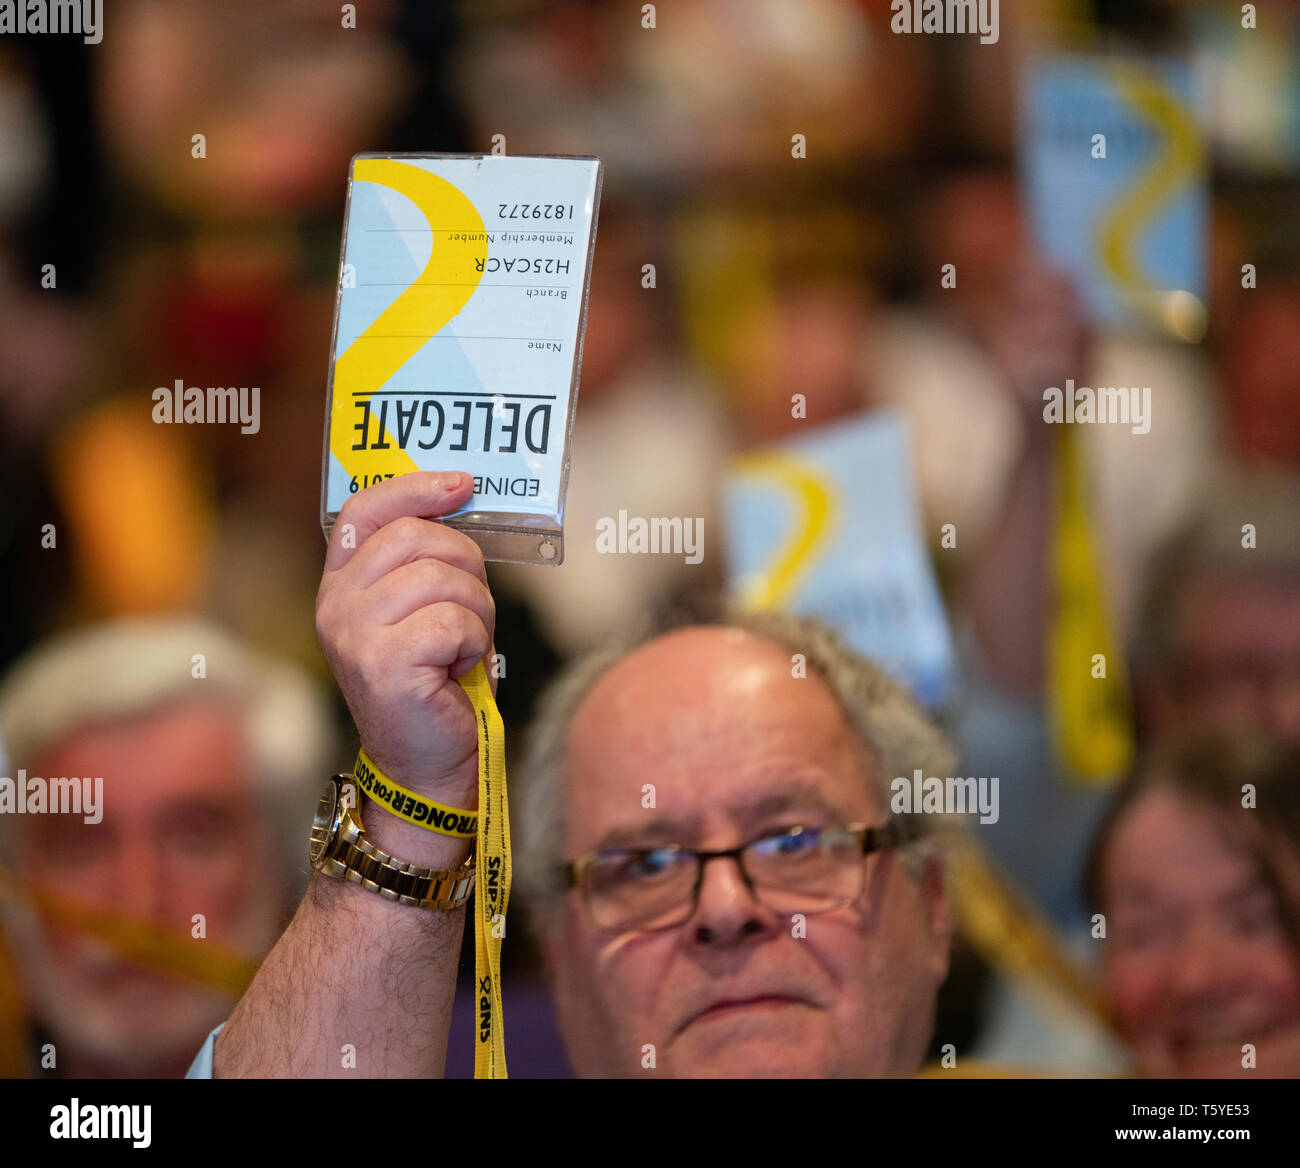 Edinburgh, Scotland, UK. 27 April, 2019. SNP ( Scottish National Party) Spring Conference takes place at the EICC ( Edinburgh International Conference Centre) in Edinburgh. Pictured; Male delegate voting during a session on day 1. Credit: Iain Masterton/Alamy Live News Stock Photo